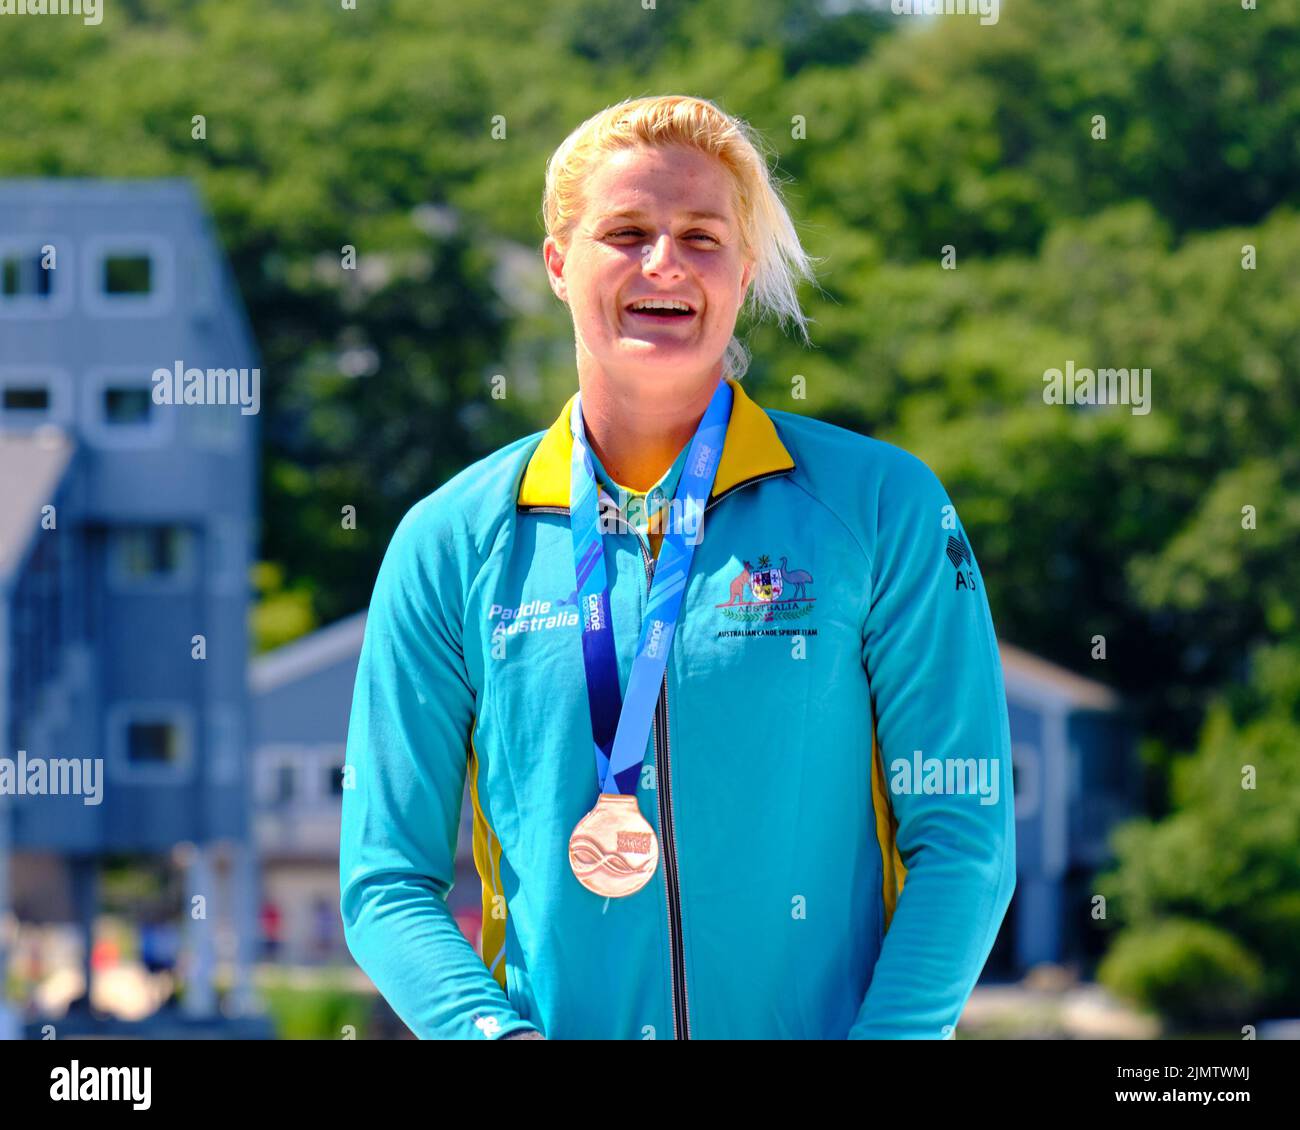 Dartmouth, Canada. August 7th, 2022. Gold Medalists and World Champion Alyssa Bull from Australia receives her medal in the K1 Women 10 00m event which she won in in 4:27.65 . This would be the first of two world titles for Bull on the day. The 2022 ICF Canoe Sprint and Paracanoe World Championships takes place on Lake Banook in Dartmouth (Halifax). Credit: meanderingemu/Alamy Live News Stock Photo